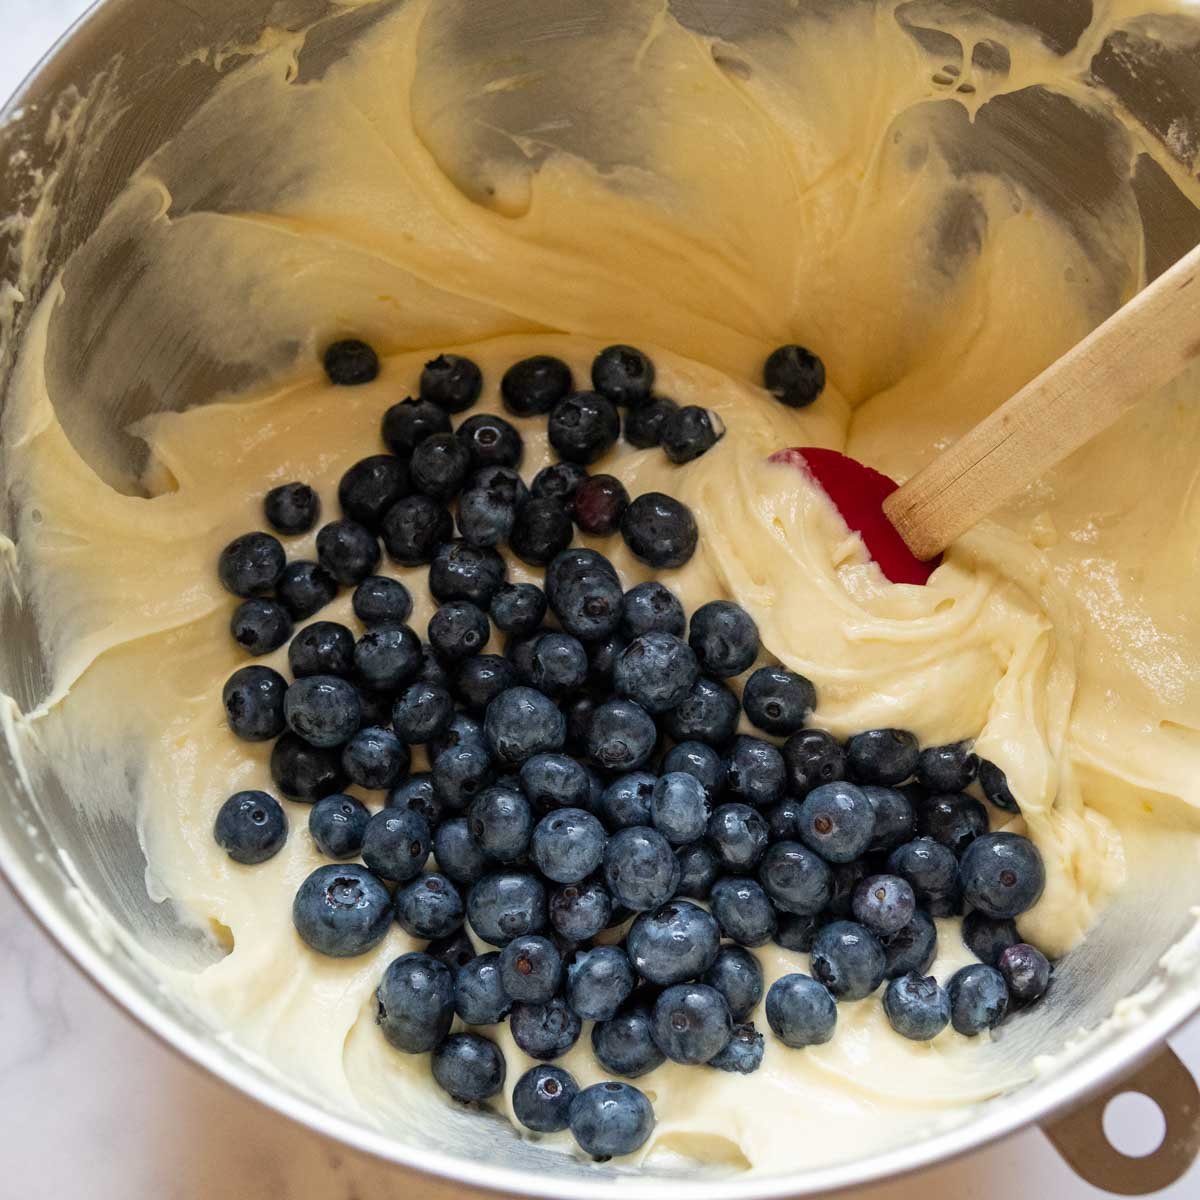 blueberries stirred in the mixture